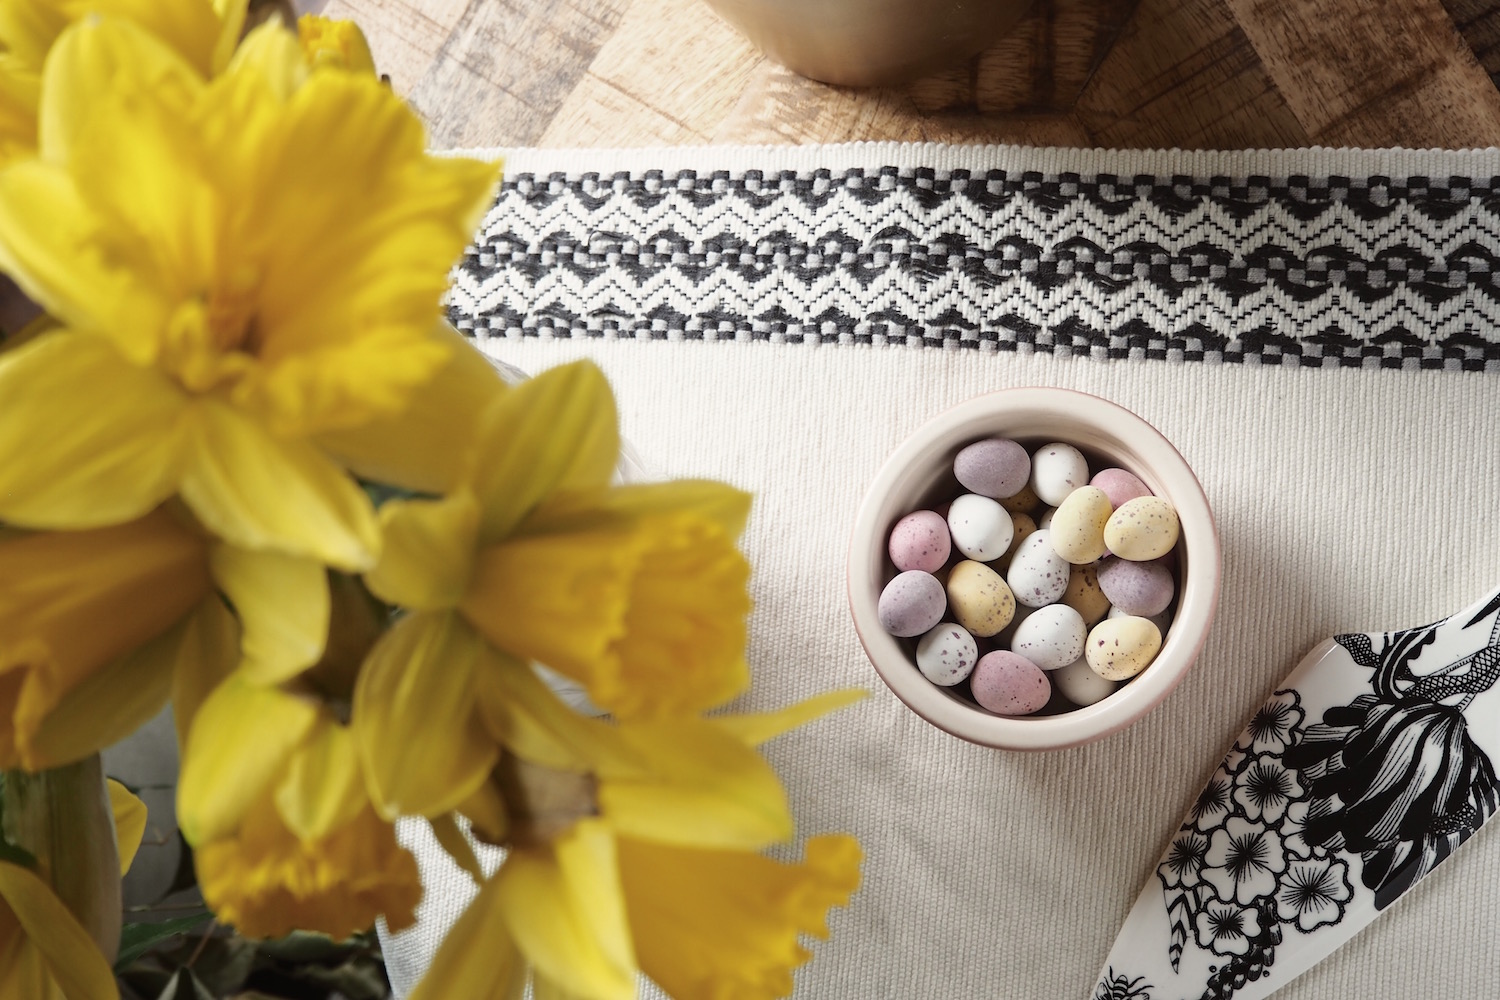 Cheap Tricks: Decorating for Easter on a Budget